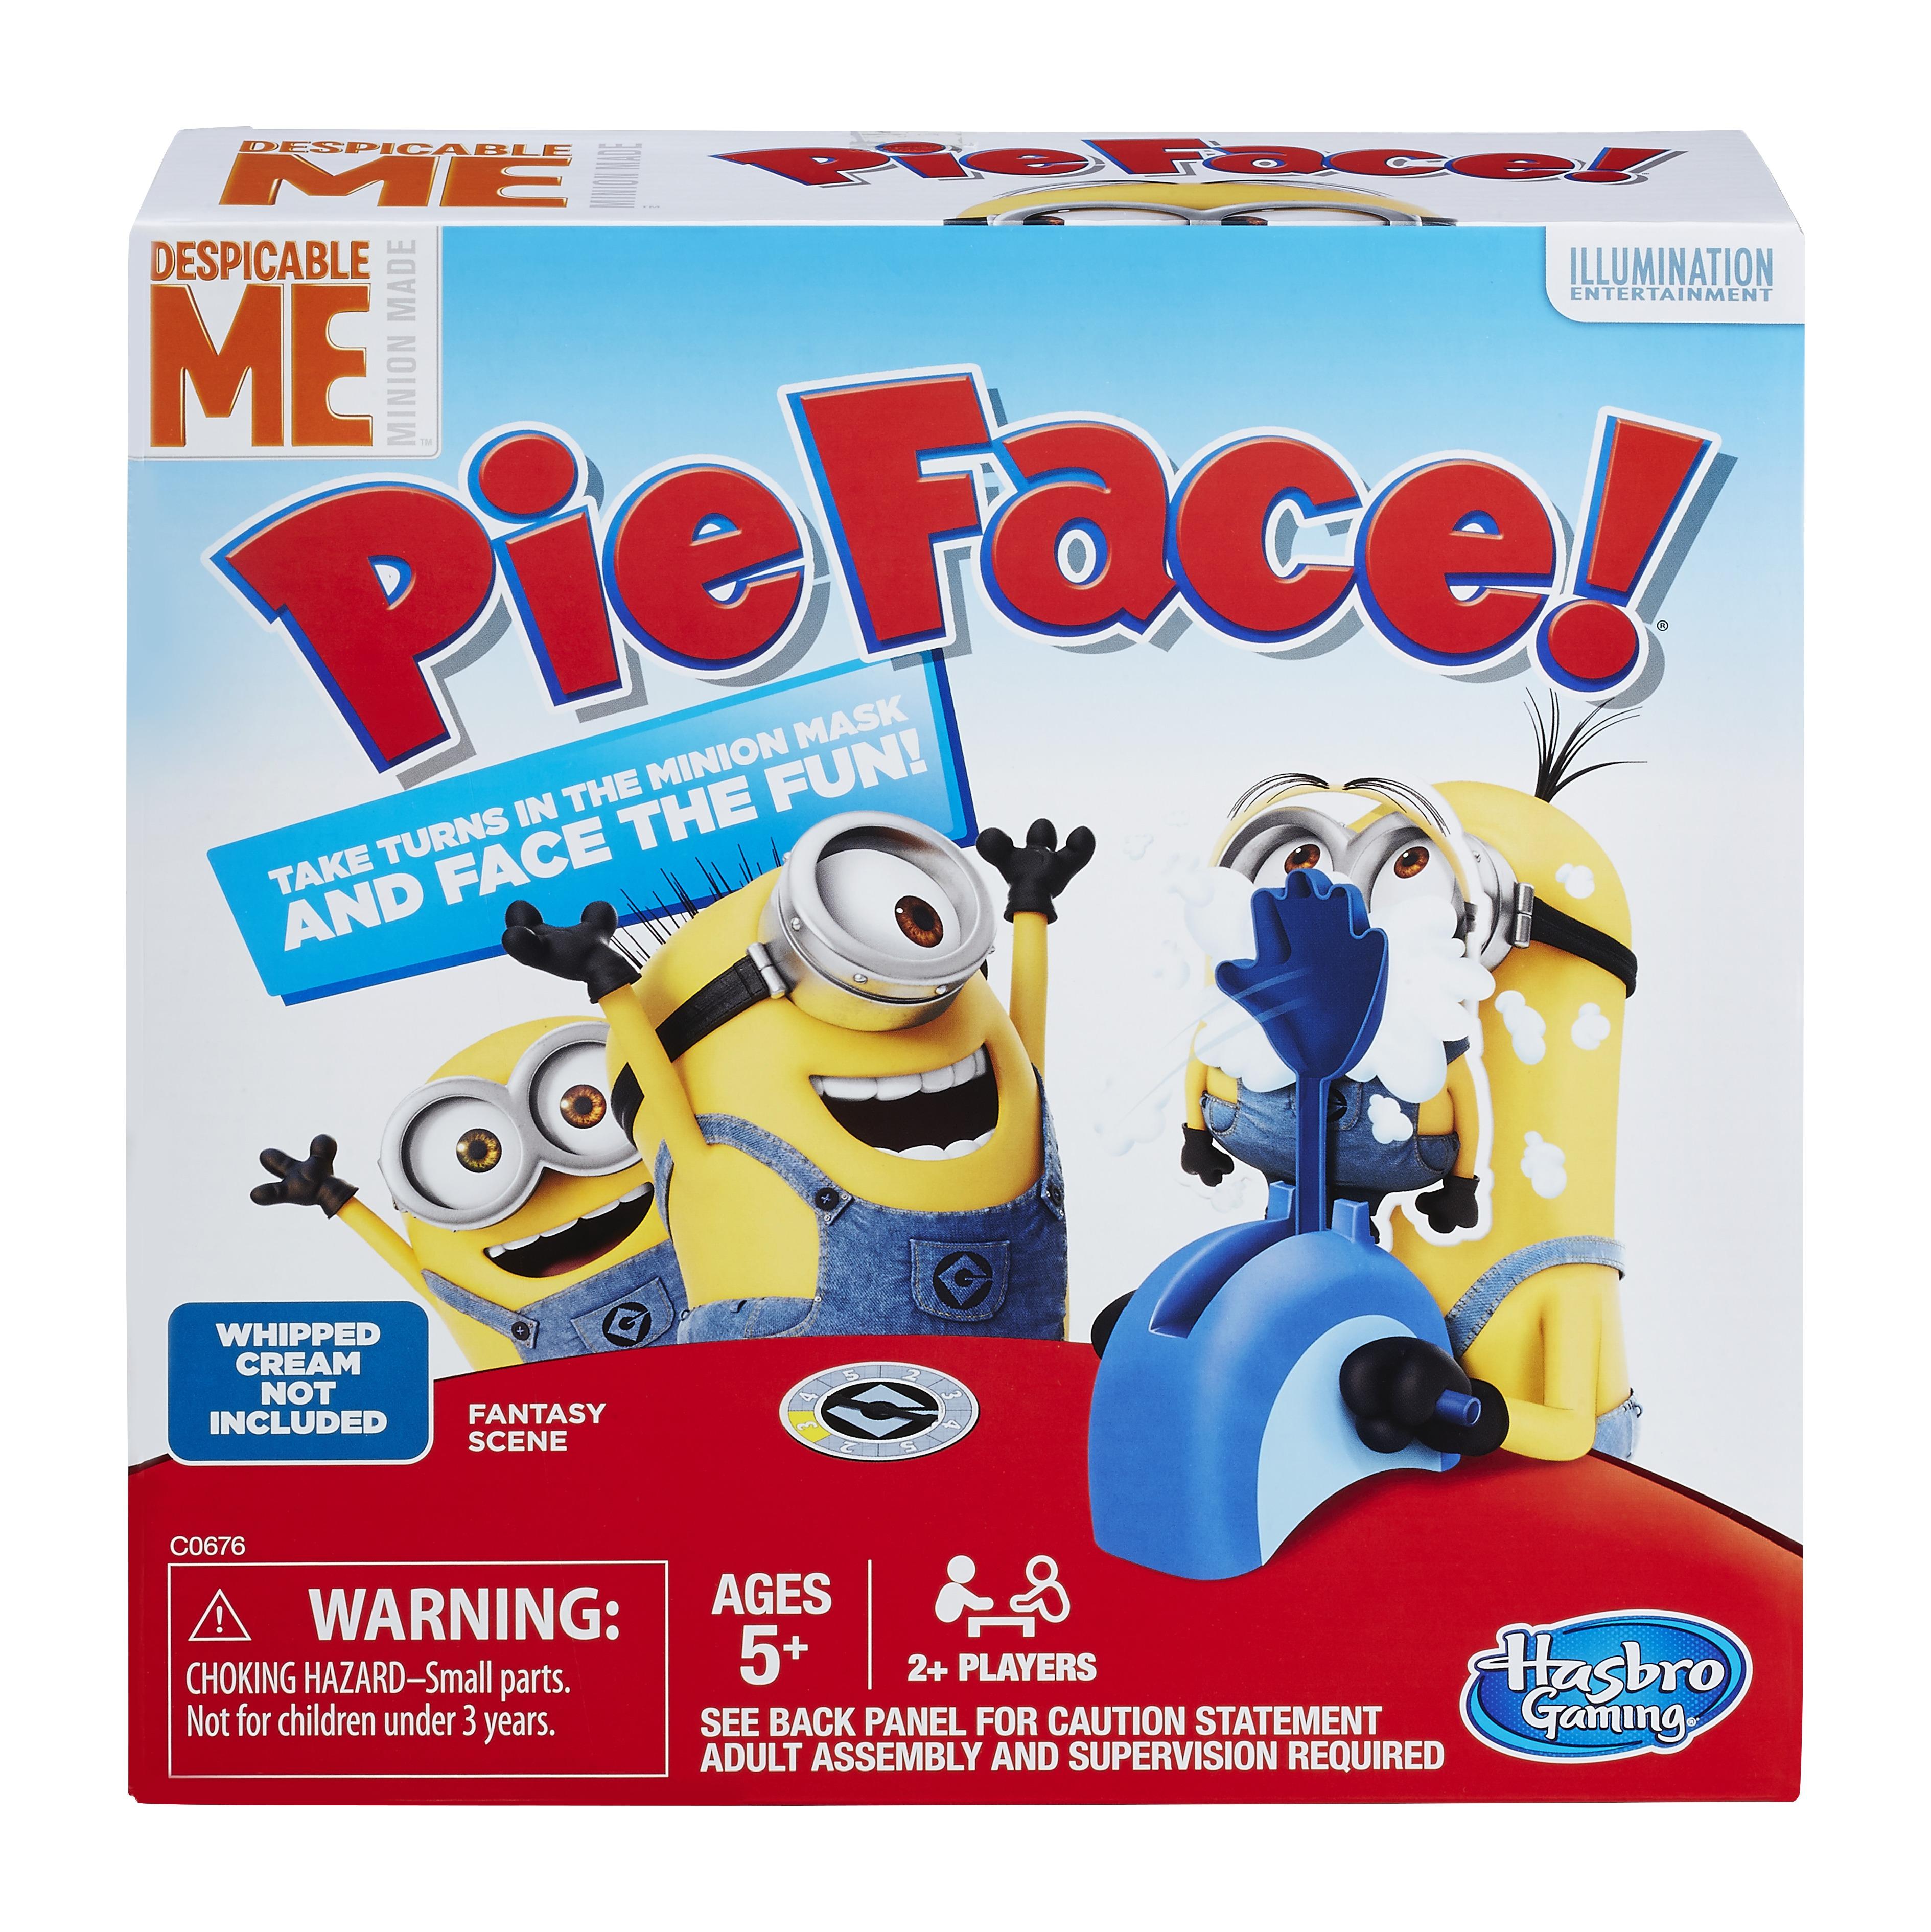 Despicable Me Minion Made Edition Pie Face Game C0676 - Best Buy